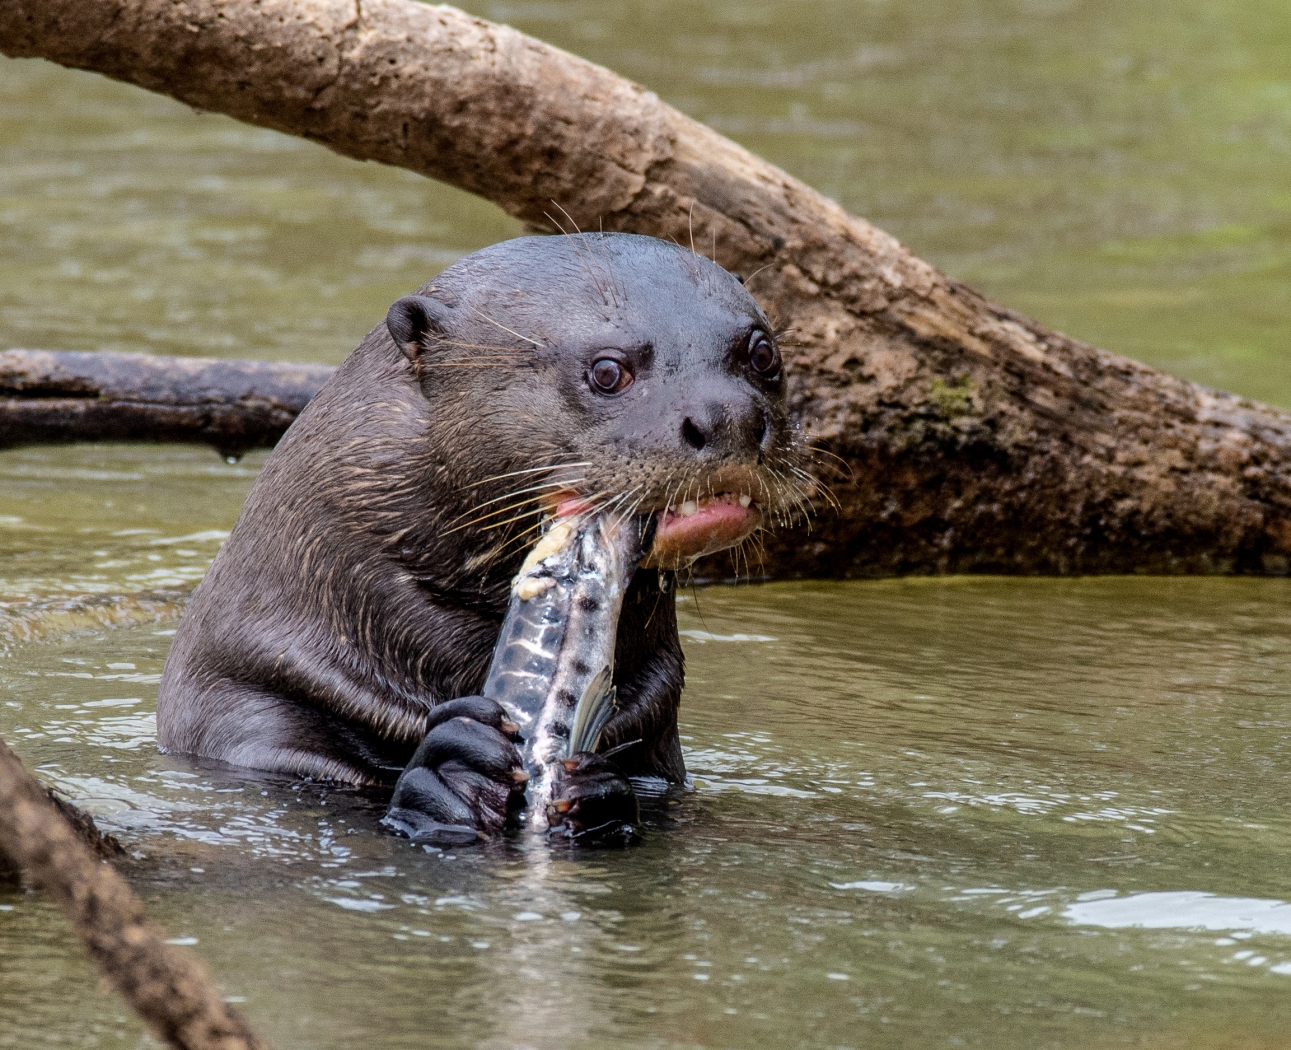 Giant River Otter - enjoying his fish by Susan Case